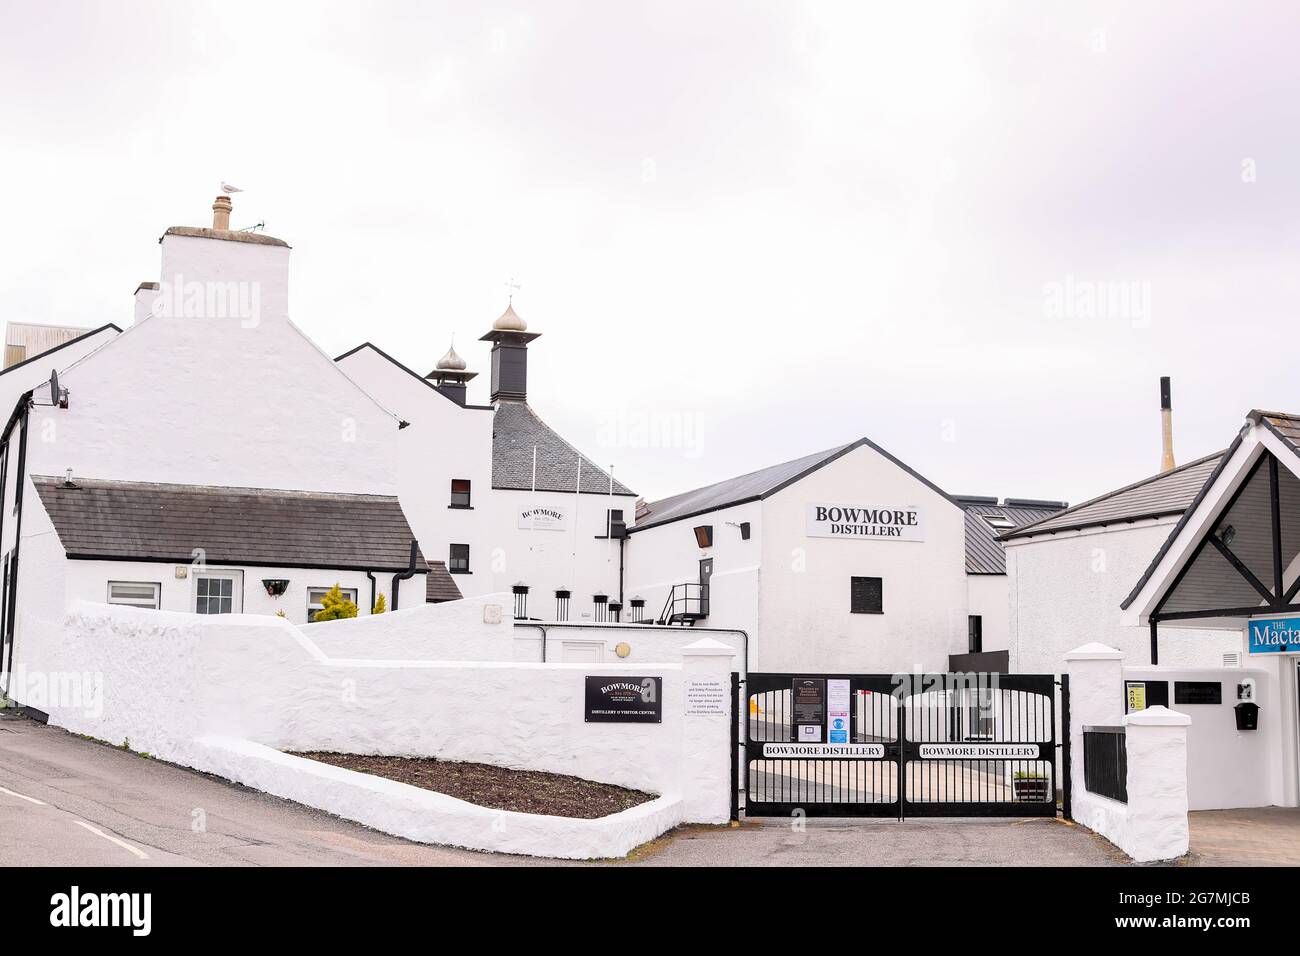 Bowmore Whisky Distillery in the town of Bowmore on the Isle of Islay of the west coast of Scotland. Stock Photo